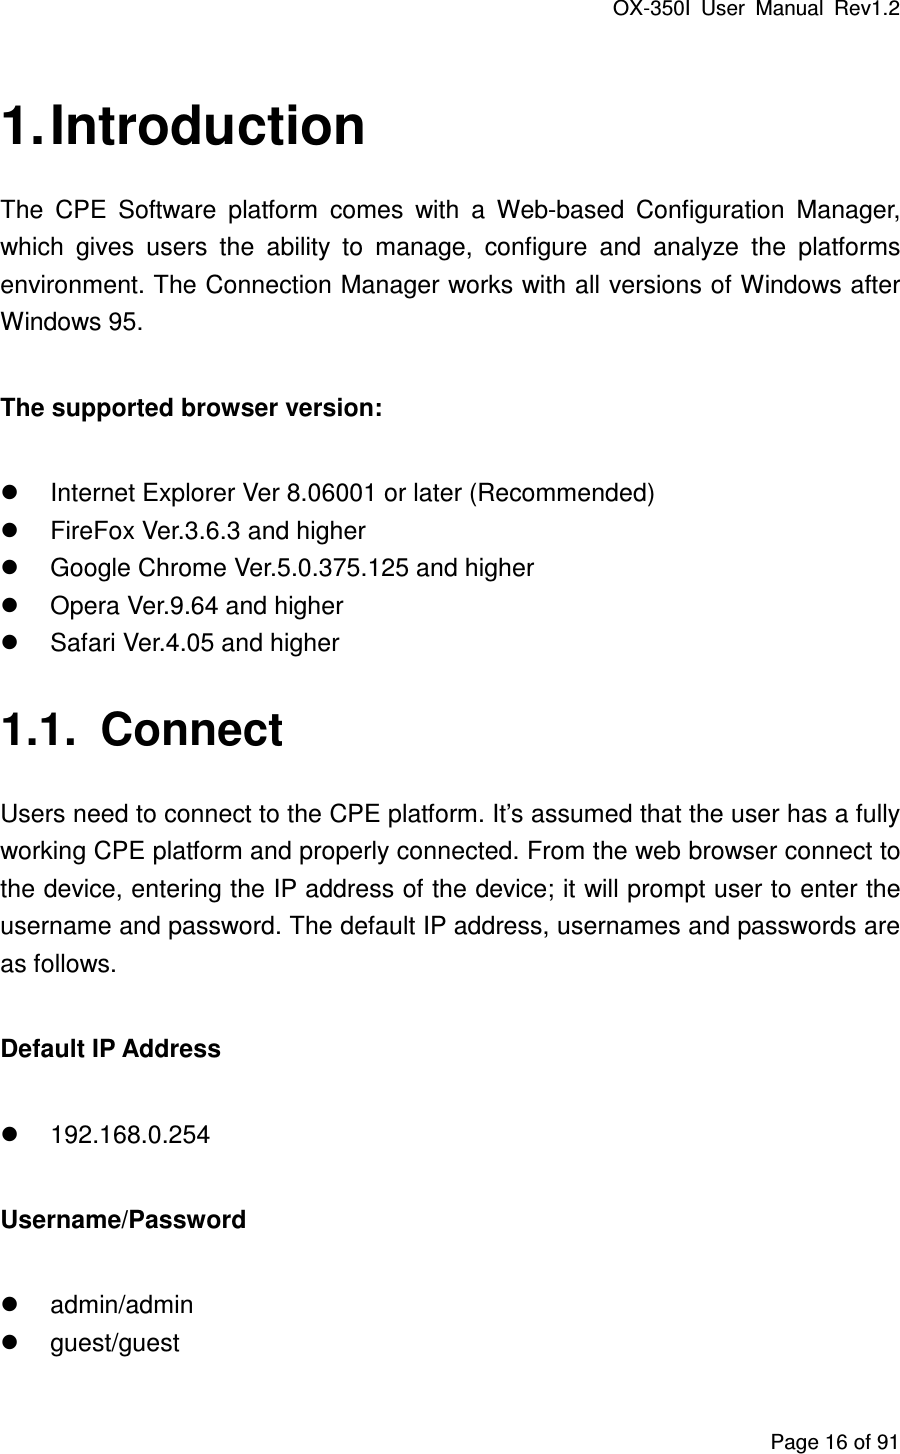 OX-350I  User  Manual  Rev1.2 Page 16 of 91 1. Introduction The  CPE  Software  platform  comes  with  a  Web-based  Configuration  Manager, which  gives  users  the  ability  to  manage,  configure  and  analyze  the  platforms environment. The Connection Manager works with all versions of Windows after Windows 95. The supported browser version:   Internet Explorer Ver 8.06001 or later (Recommended)   FireFox Ver.3.6.3 and higher   Google Chrome Ver.5.0.375.125 and higher   Opera Ver.9.64 and higher   Safari Ver.4.05 and higher 1.1.  Connect Users need to connect to the CPE platform. It’s assumed that the user has a fully working CPE platform and properly connected. From the web browser connect to the device, entering the IP address of the device; it will prompt user to enter the username and password. The default IP address, usernames and passwords are as follows. Default IP Address   192.168.0.254 Username/Password   admin/admin   guest/guest 